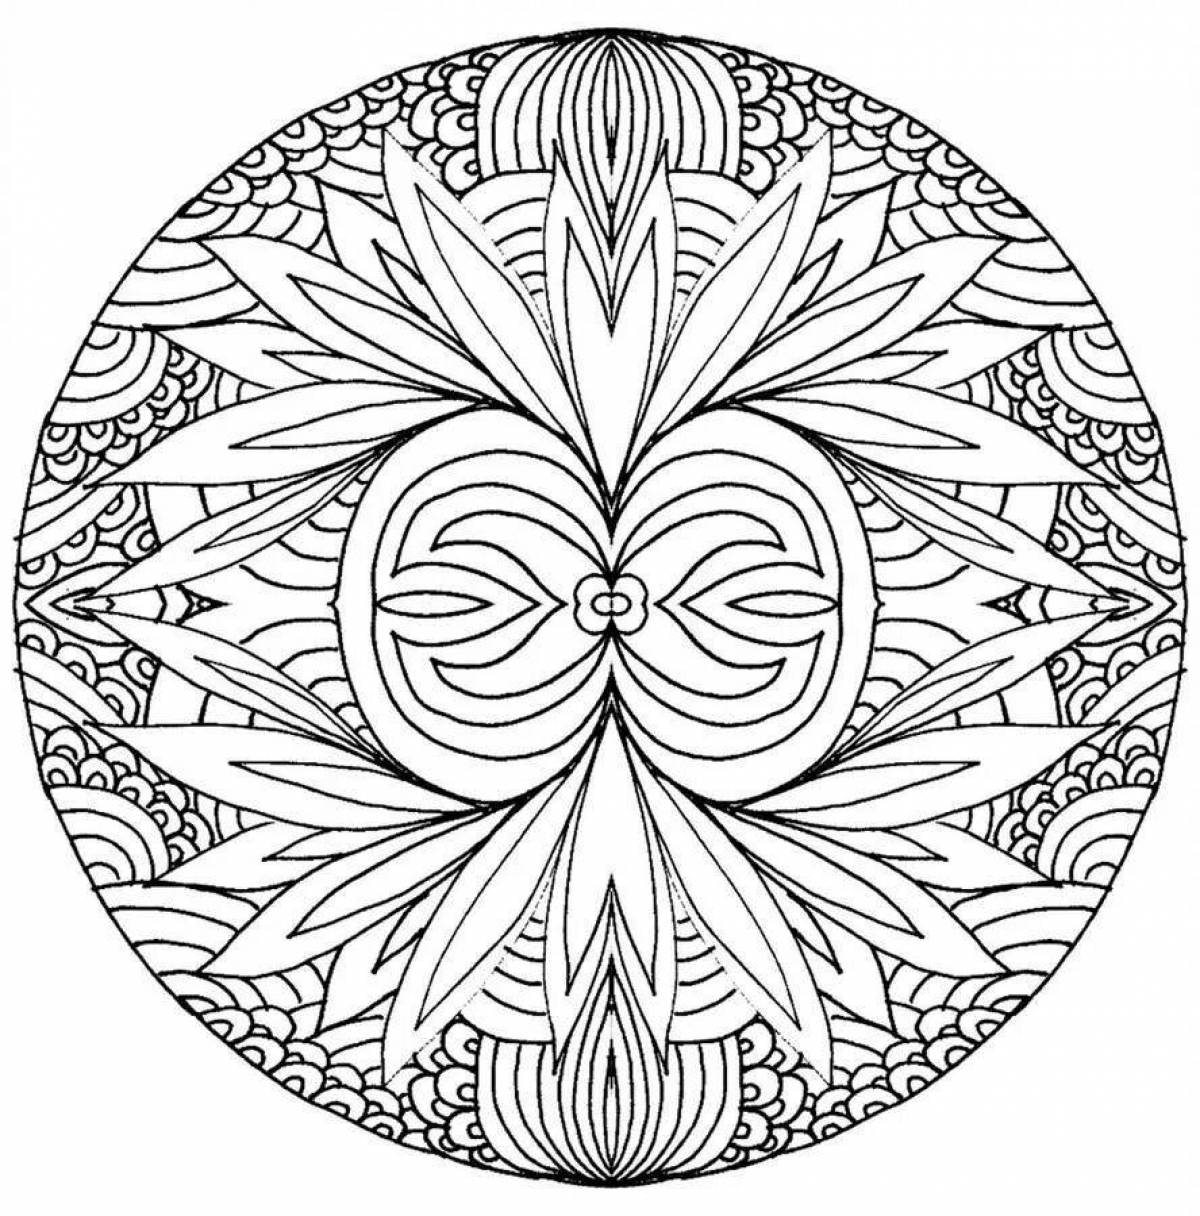 Awesome health and wellness mandala coloring page